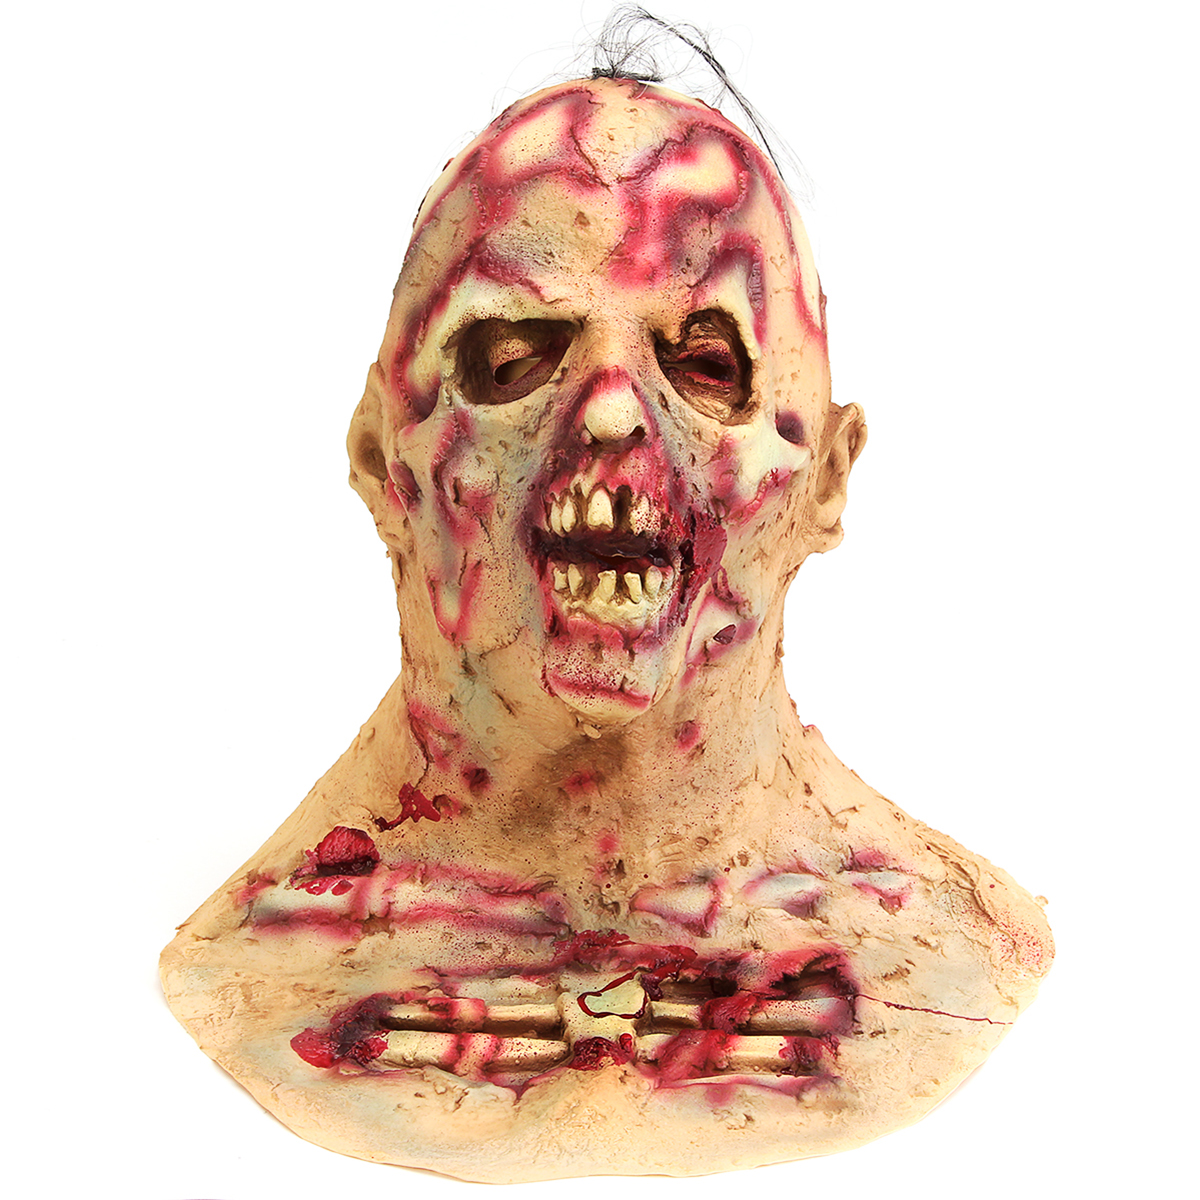 

Halloween Scary Infected Zombie Adult Mask Melting Face Latex Horror Costume